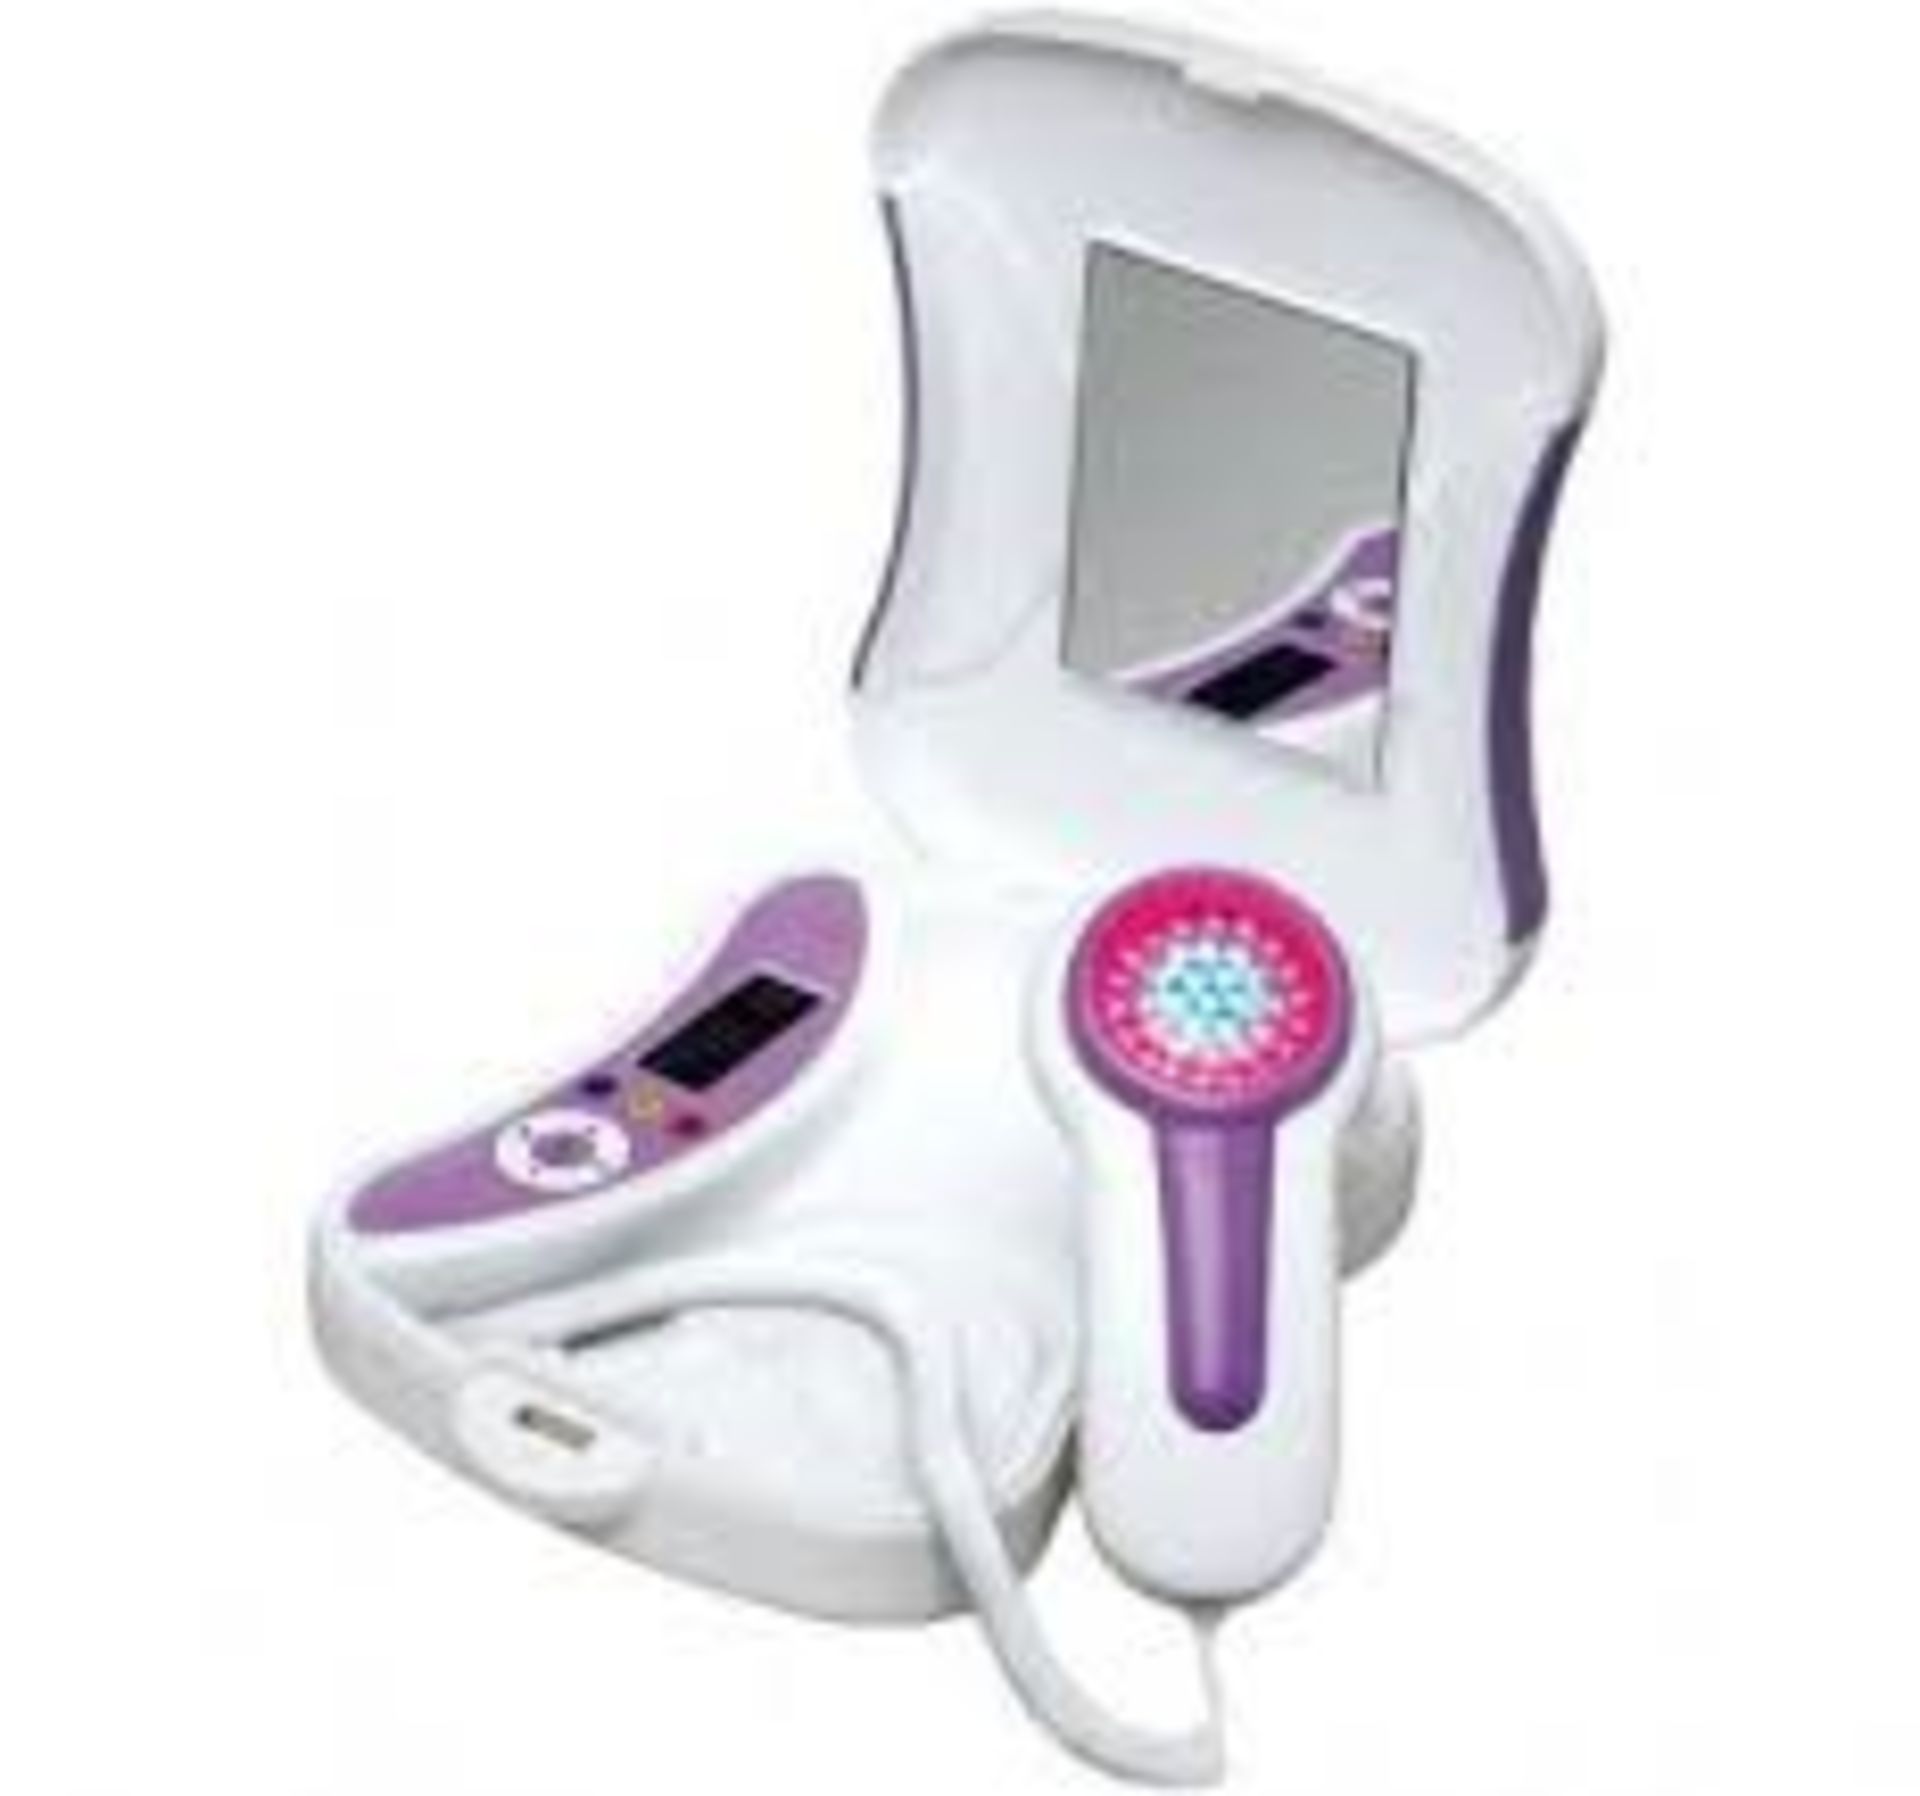 1 AS NEW BOXED BEAUTYLITE BL 100 FACIAL LIGHT THERAPY / RRP £79.99 (VIEWING HIGHLY RECOMMENDED) - Image 2 of 2